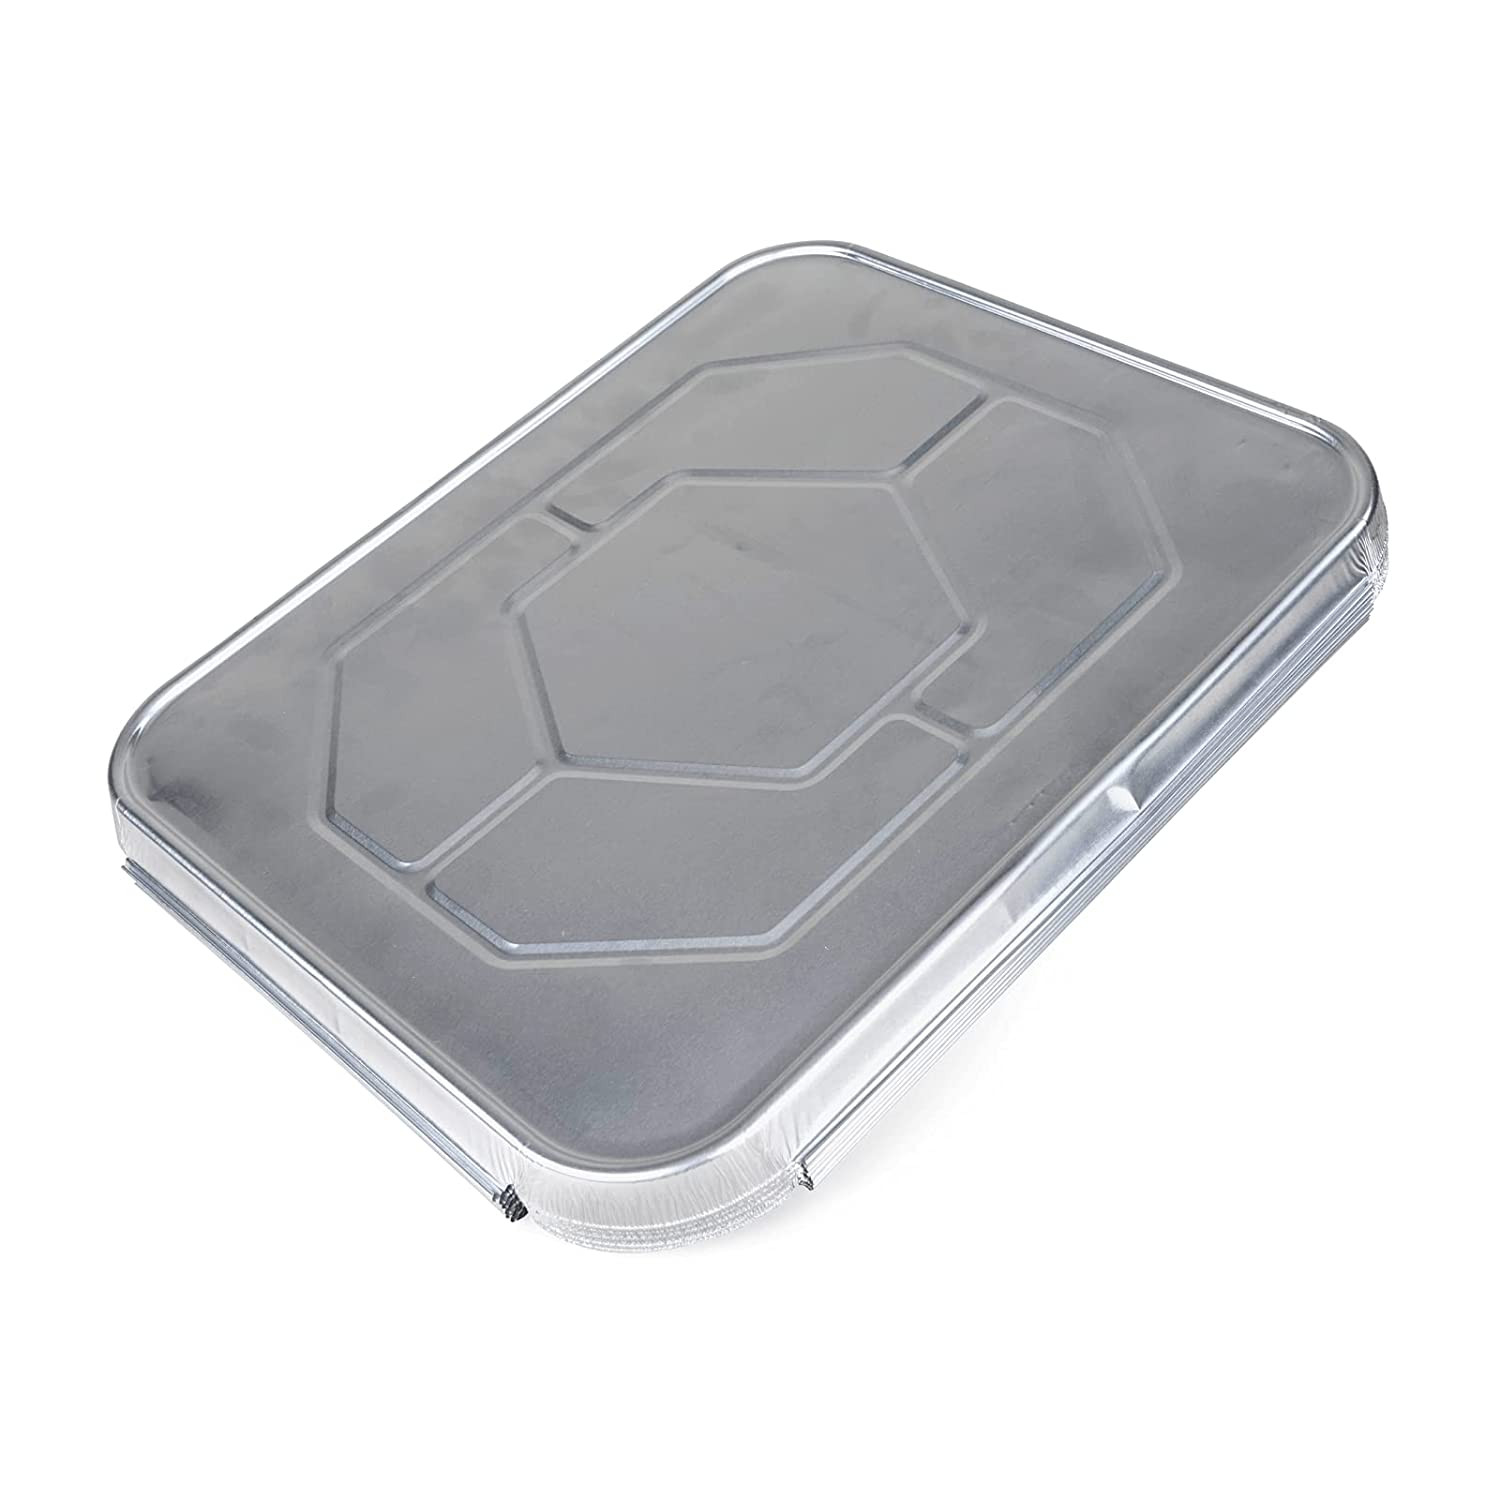 https://idlpack.com/image/cache/catalog/Products/Foil%20Pans%20and%20Trays/61r7pcAOX9L._SL1500_-1500x1500.jpg